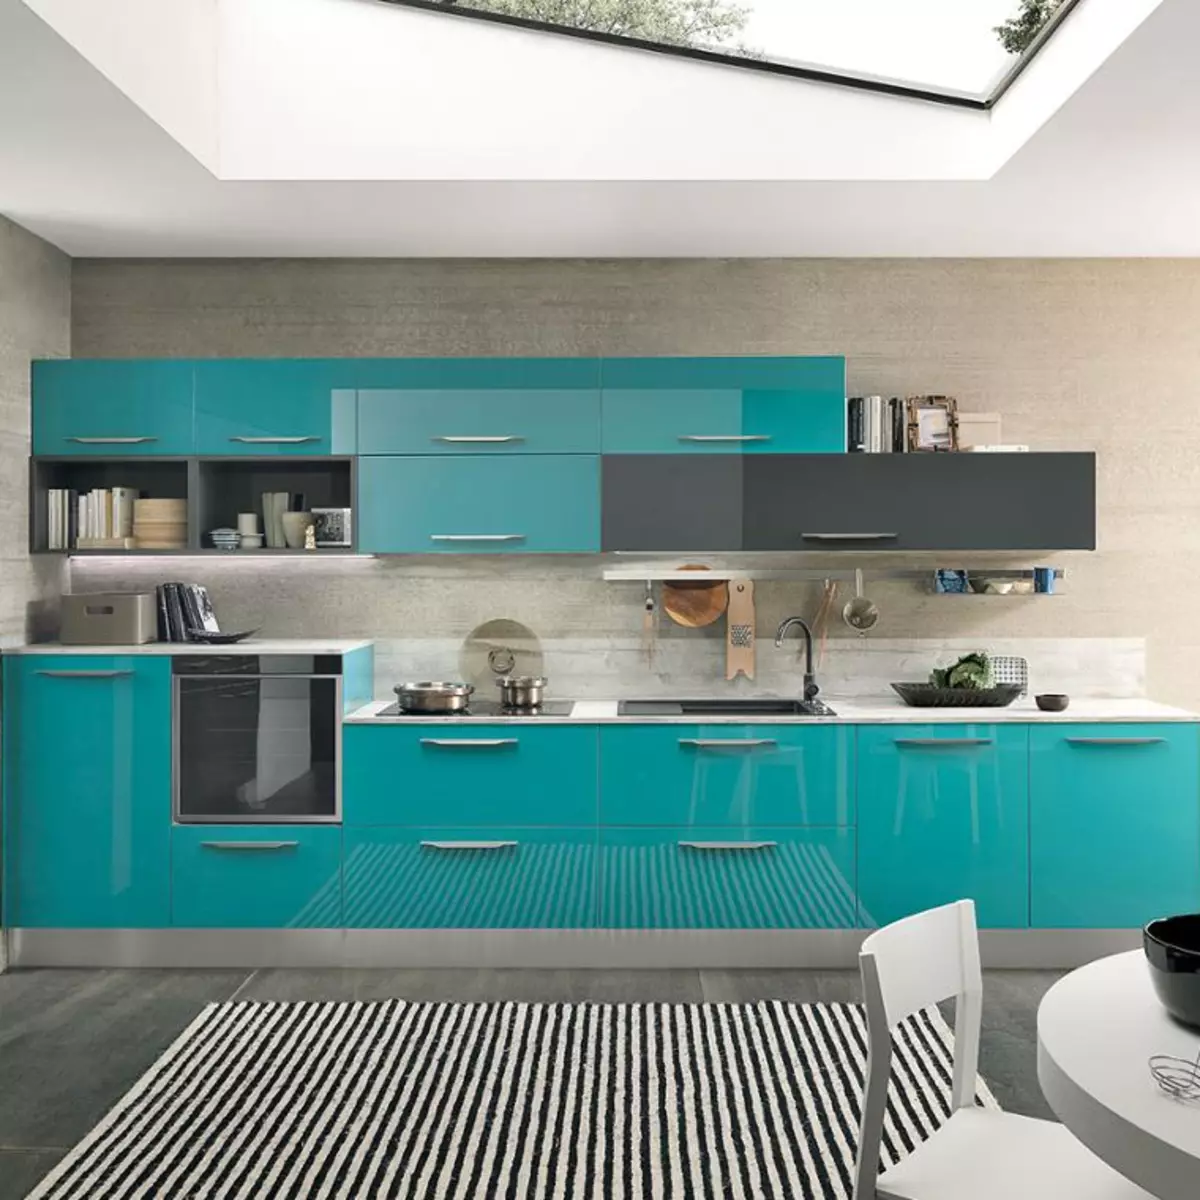 Turquoise kitchen (80 photos): selection of kitchen headset of turquoise-white and gray-turquoise color in the interior, combination of turquoise with beige and Tiffany's color 21083_11